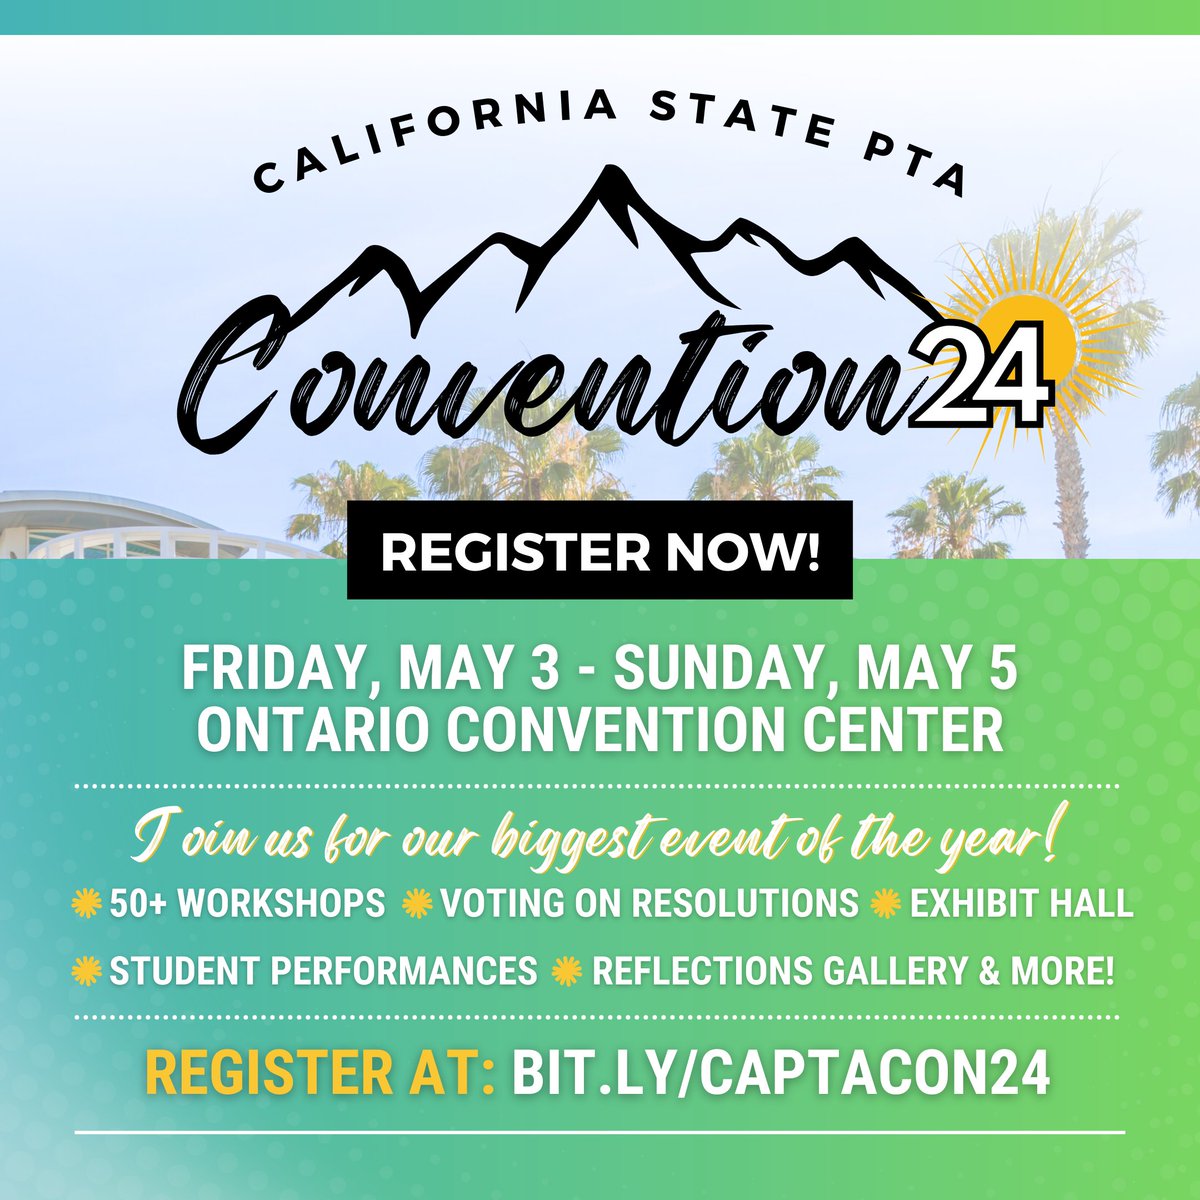 🚨 REGISTRATION IS OPEN 🚨 Join us in Ontario, CA from May 3rd - May 5th for California State PTA’s Annual Convention! Full-time passes, one-day passes, and additional add-ons are now available. 🌟 Visit 🔗 bit.ly/CAPTACON24 to REGISTER NOW! See you in Ontario! 🎉